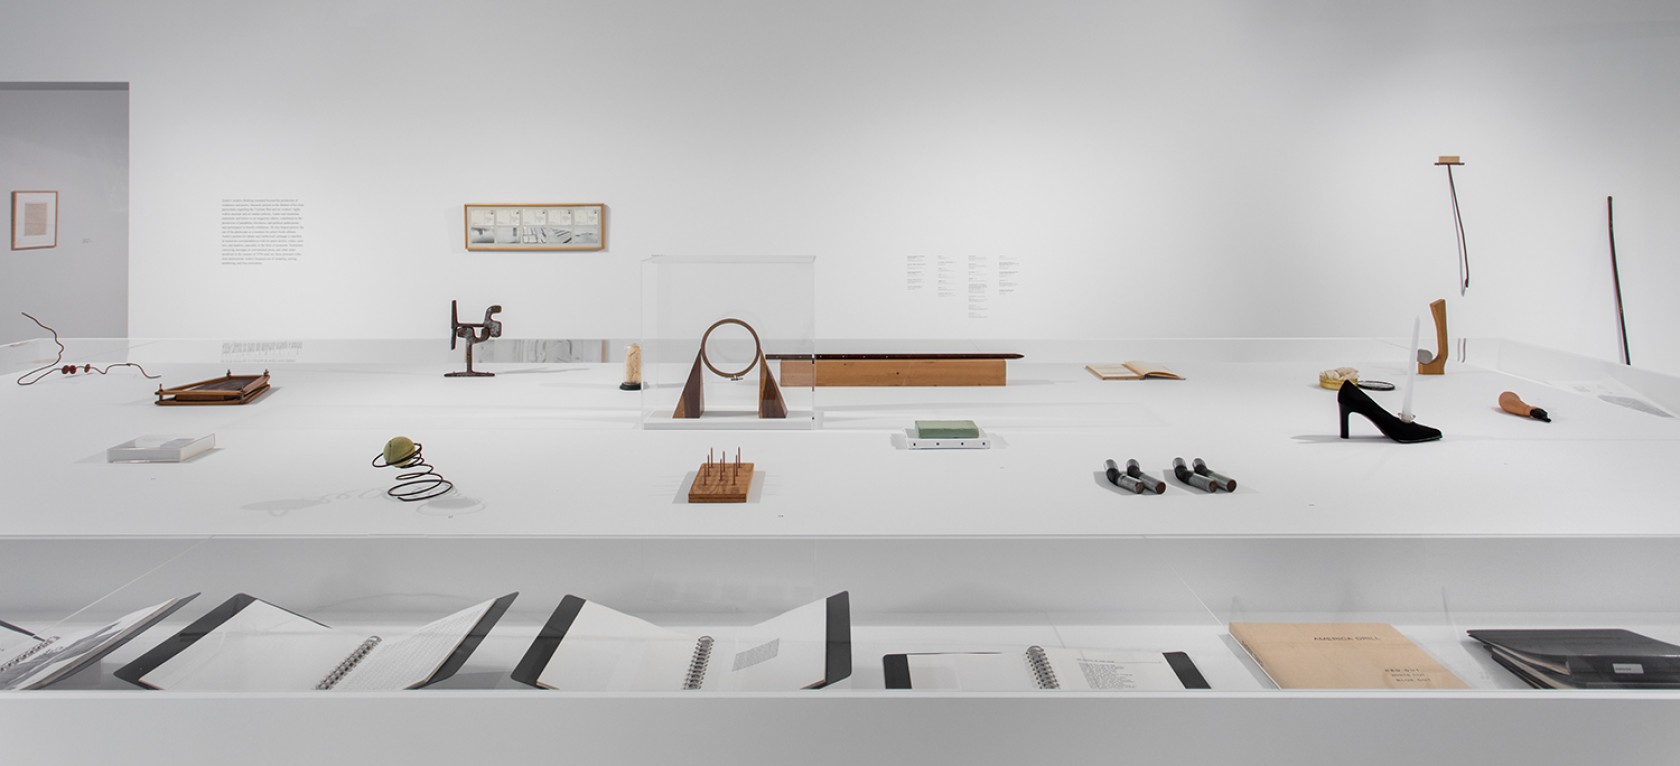 Carl Andre: Sculpture as Place, 1958–2010 Installation View 20